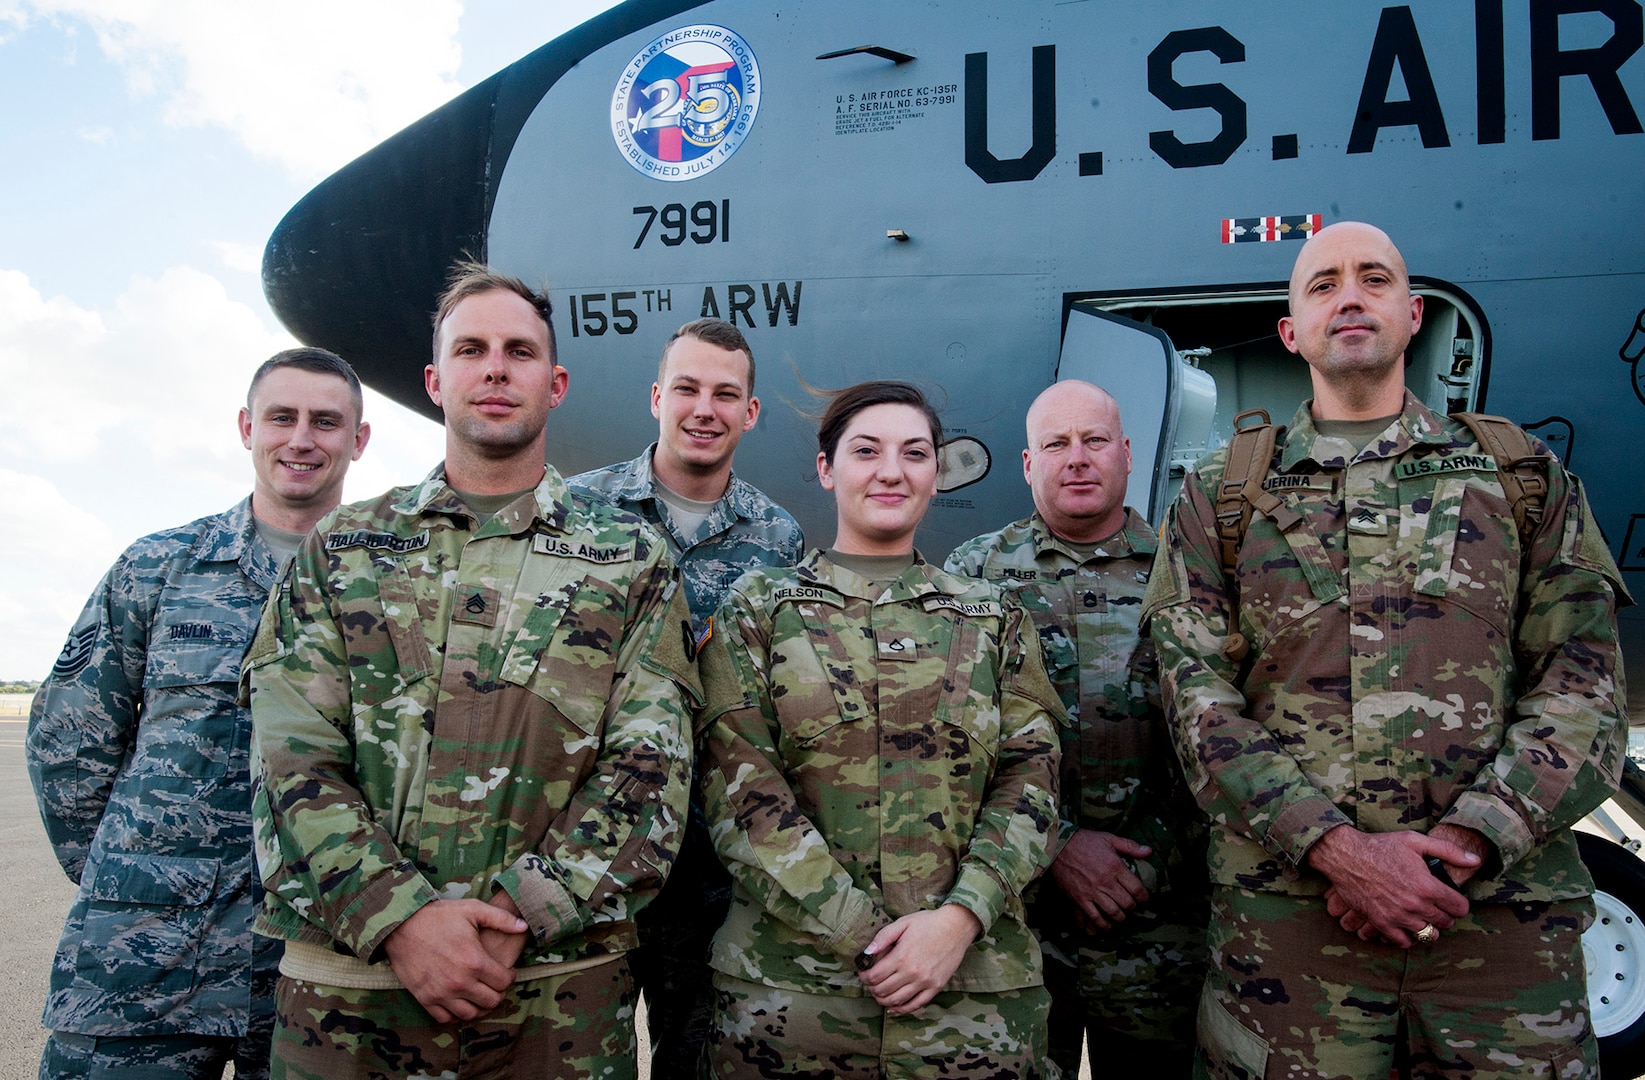 Members of the special combined Nebraska and Texas National Guard color guard pose in front of a Nebraska Air National Guard KC-135R Stratotanker bearing the special 25th State Partnership Program Anniversary logo following an Oct. 29 flight back to the United States from the Czech Republic where the team marched in the Oct. 28 Czech Centennial Military Parade in Prague. Pictured are, from left, Tech. Sgt. Darren Davlin, Nebraska Air National Guard; Staff Sgt. Eric Halliburton, Texas Army National Guard; Senior Airman Avery Prai, Nebraska Air National Guard; Pfc. Alexa Nelson, Nebraska Army National Guard; Sgt. 1st Class Robb Miller, Texas Army National Guard; and Sgt. Adrian Tejerina, Texas Army National Guard.